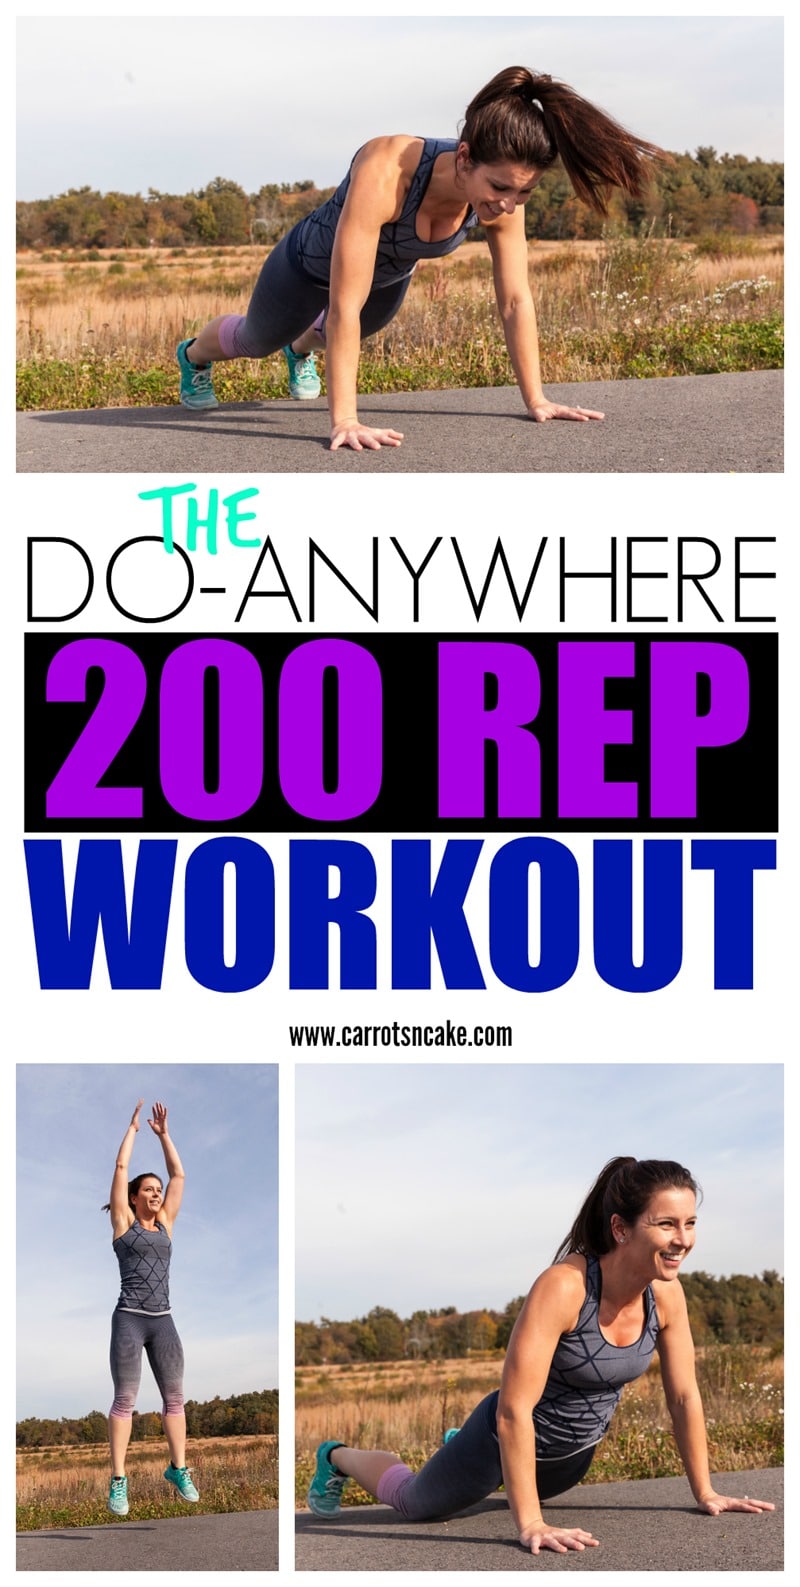 DO-ANYWHERE 200 REP WORKOUT